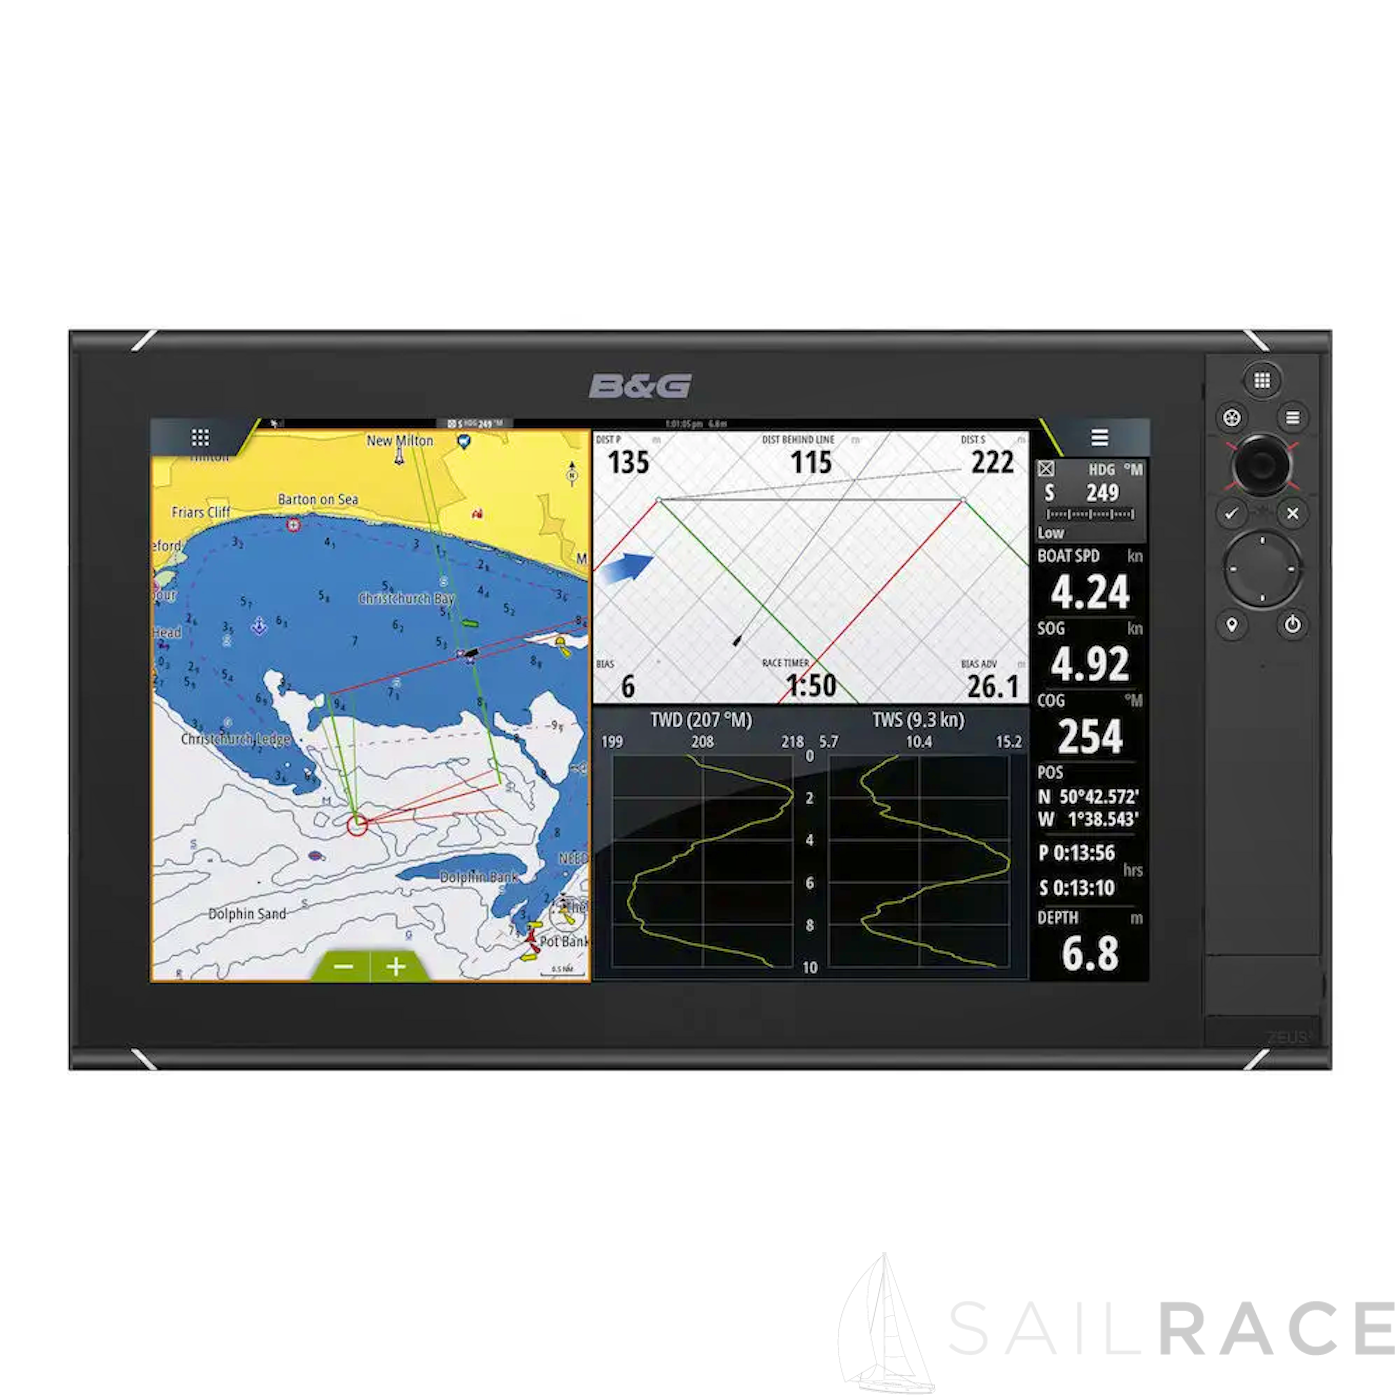 B&G The Zeus³-16 is an easy-to-use chartplotter navigation system for blue water cruisers and regatta racers